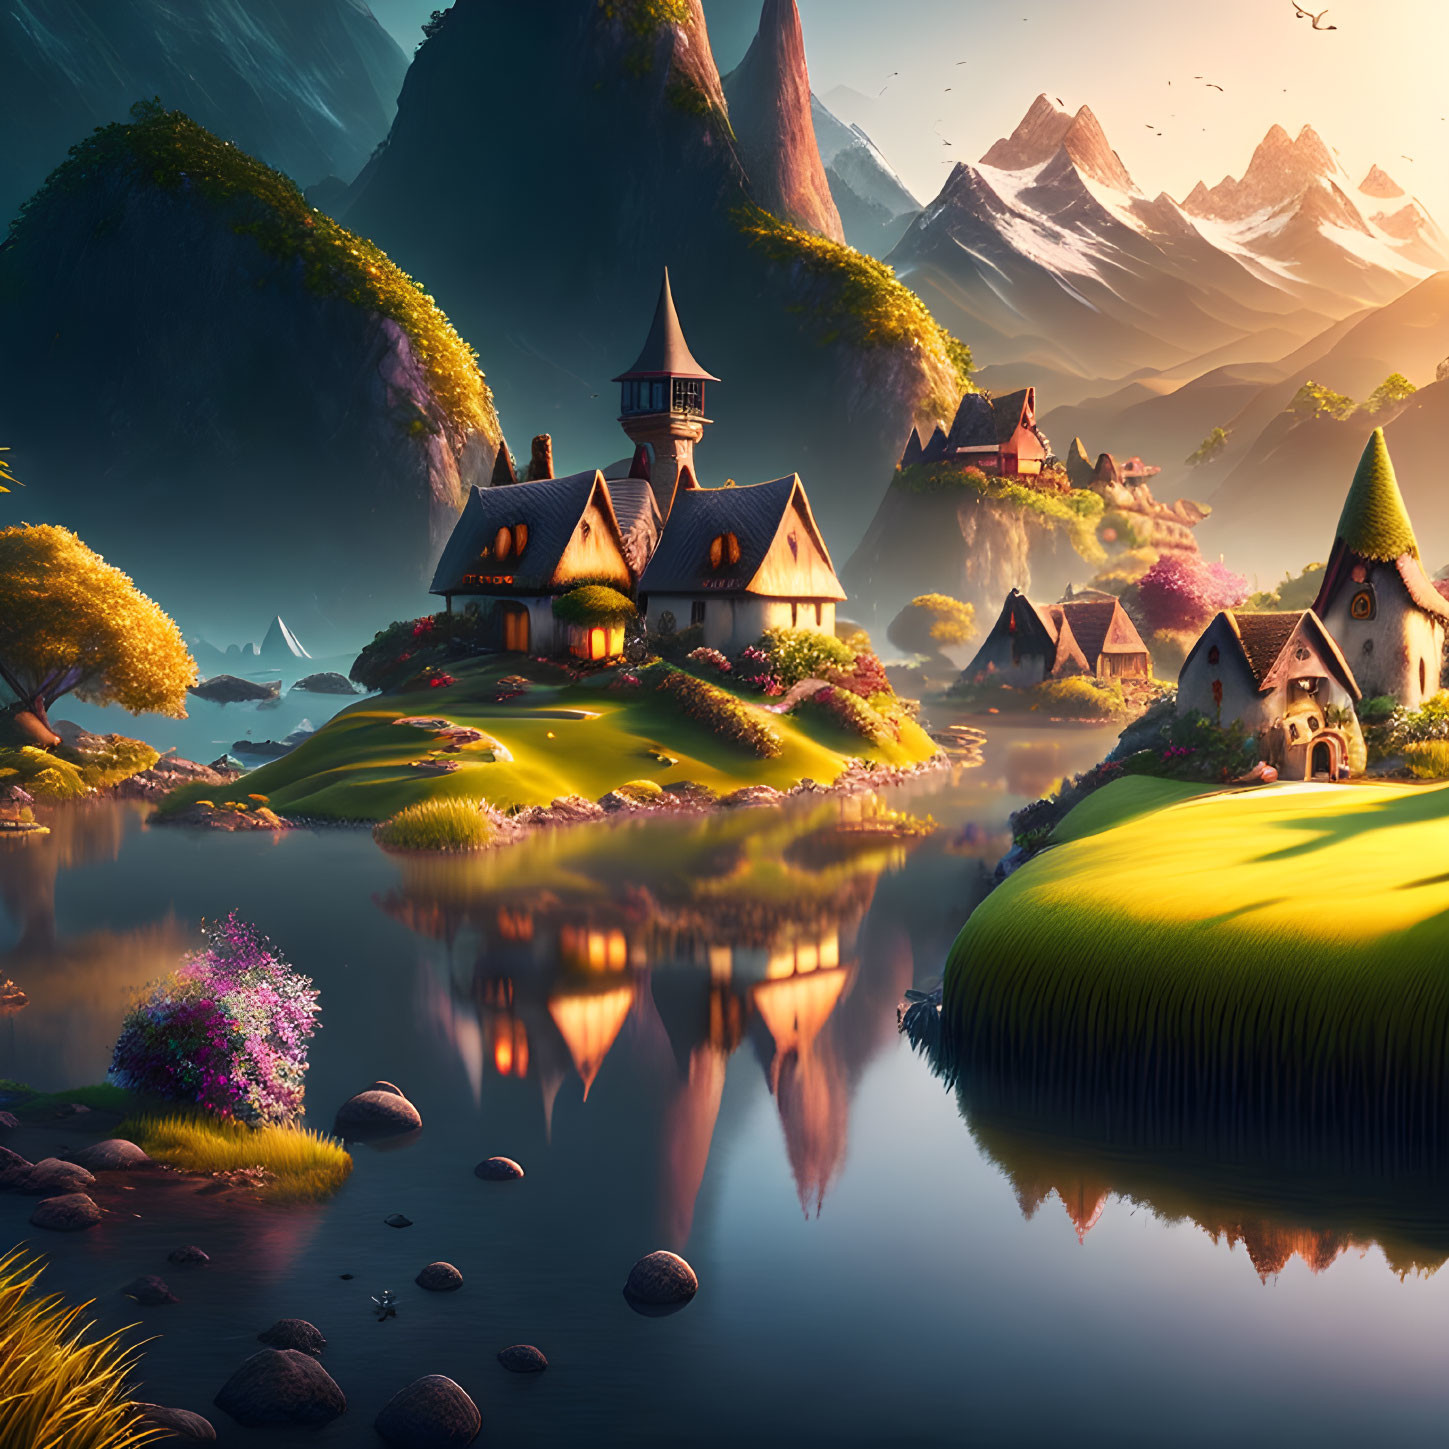 Tranquil fantasy landscape with houses, lake, greenery, mountains, and sunrise